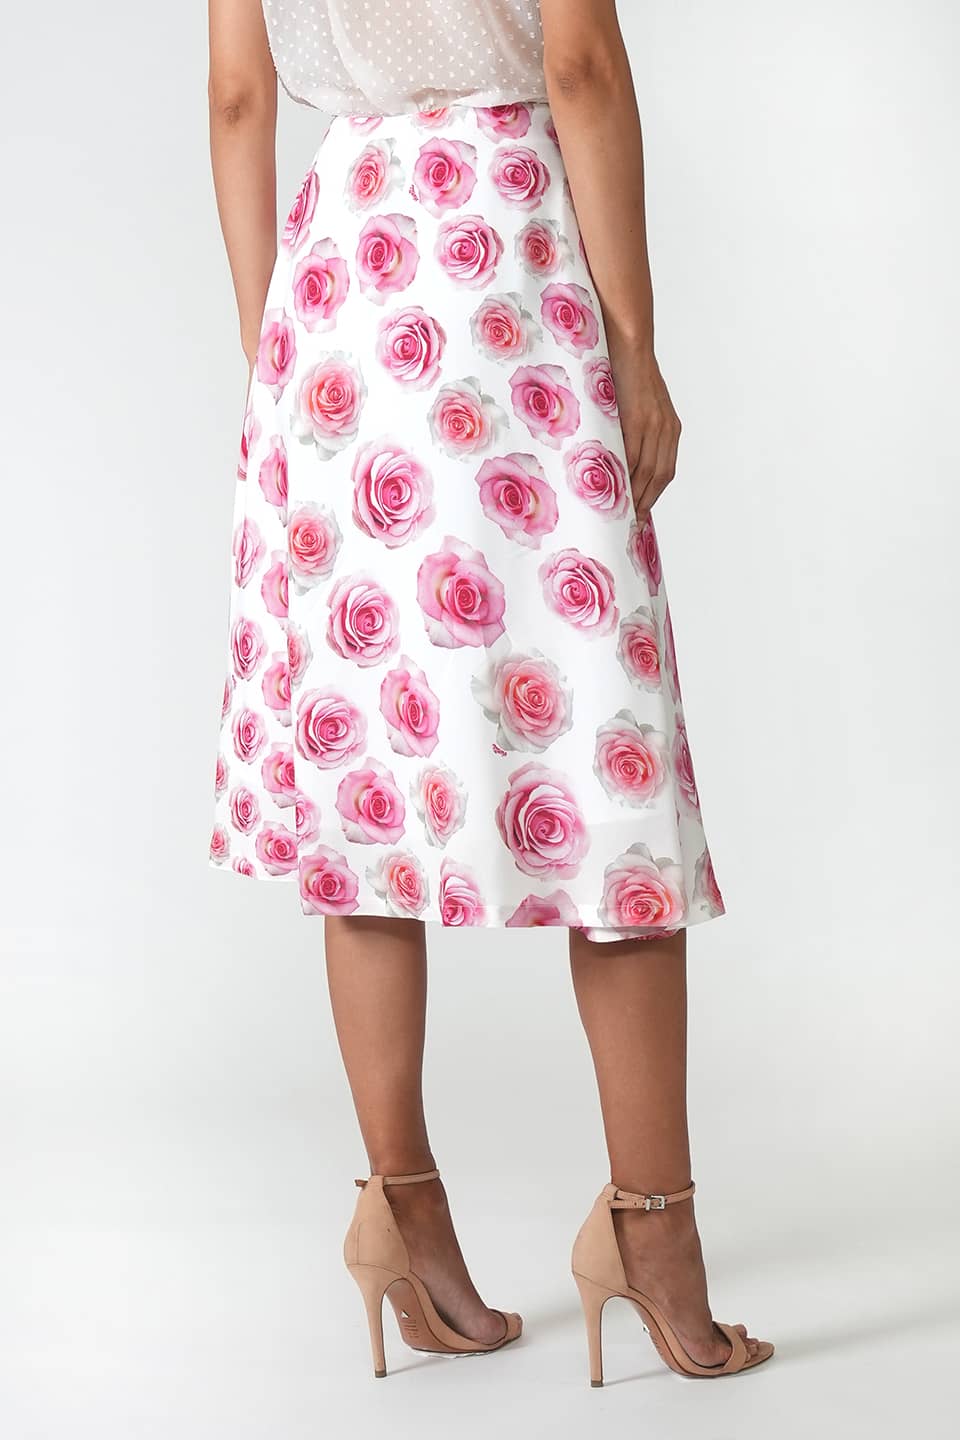 Thumbnail for Product gallery 5, Rose Print Skirt